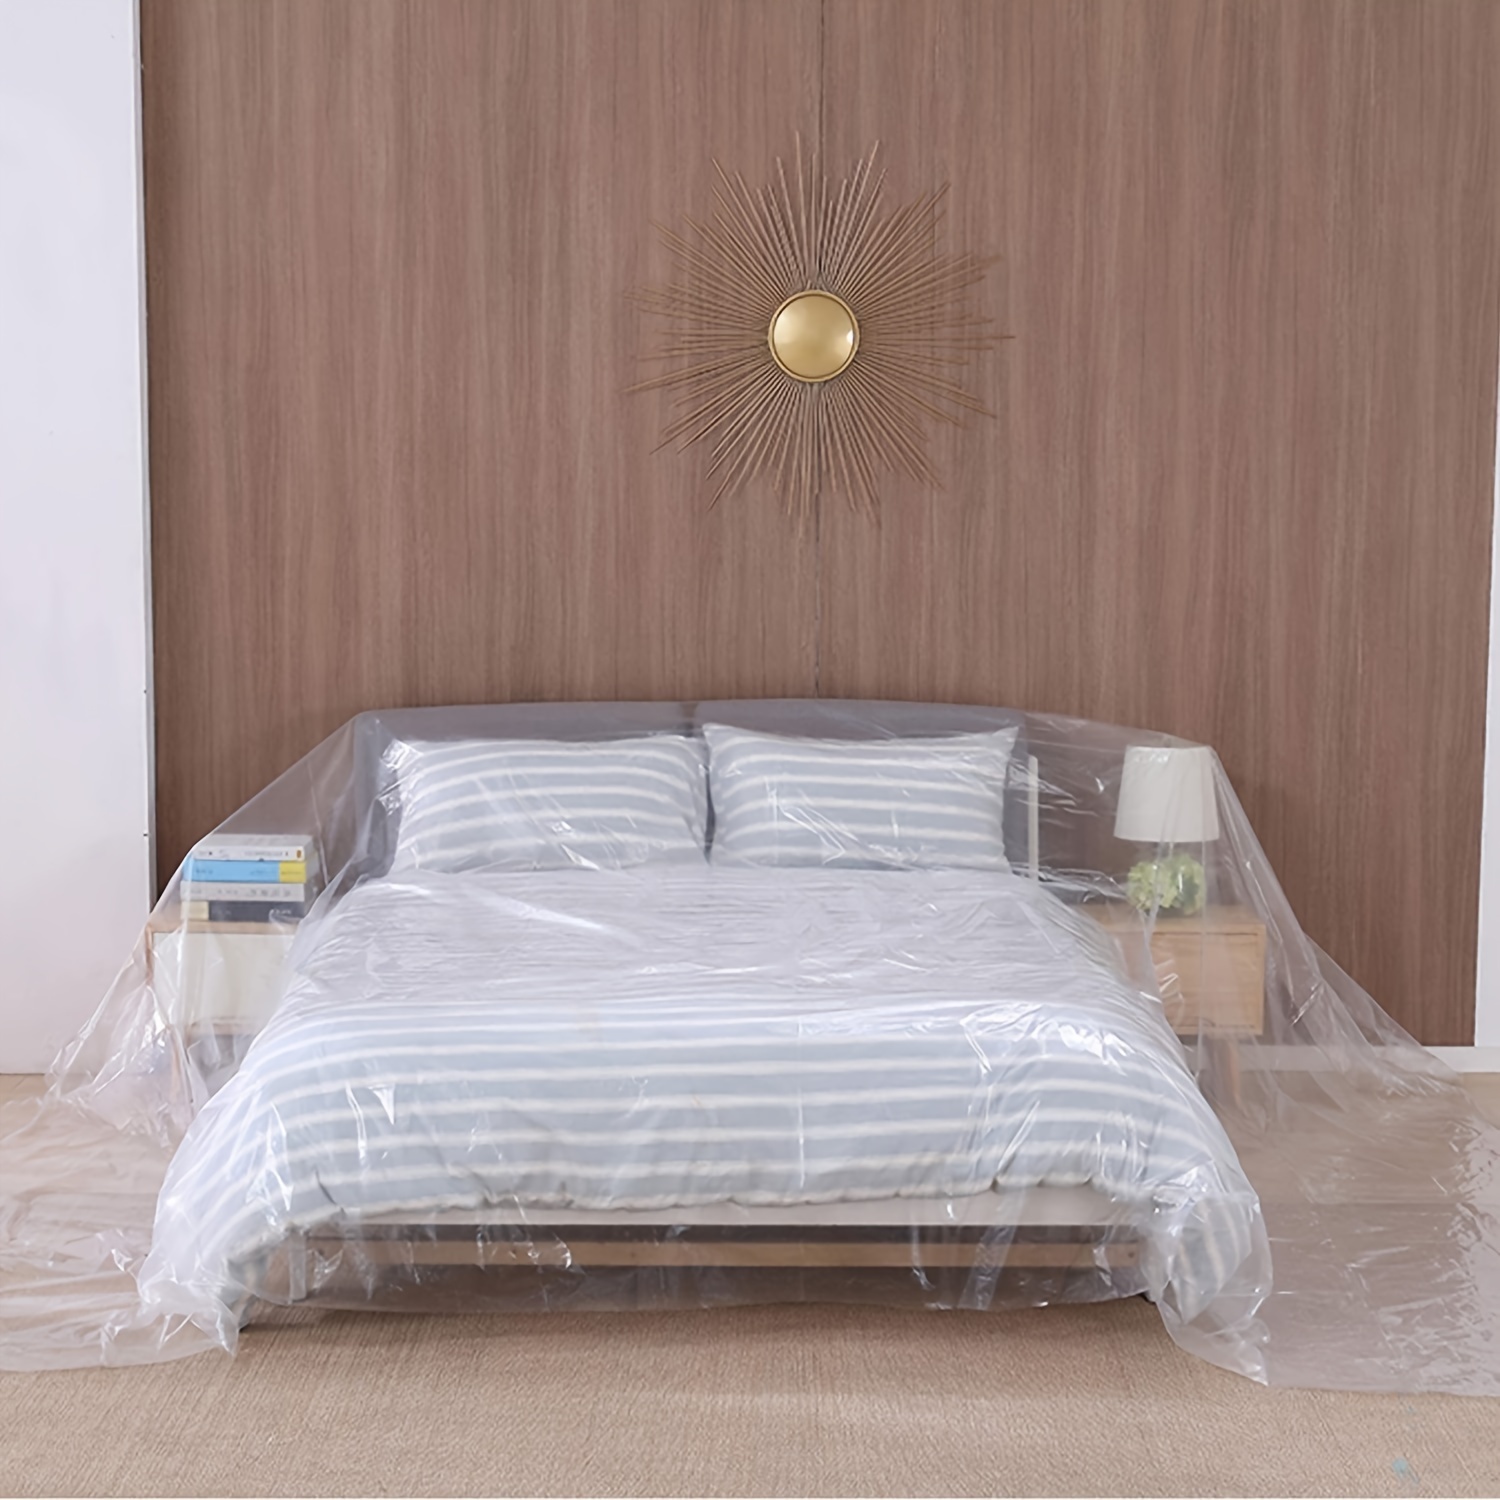 Ruibo Large Sofa Couch Cover for Furniture Protector Cover/Waterproof Plastic Drop Cloth/Clear Plastic Tarp for Painting,Moving and Long Term